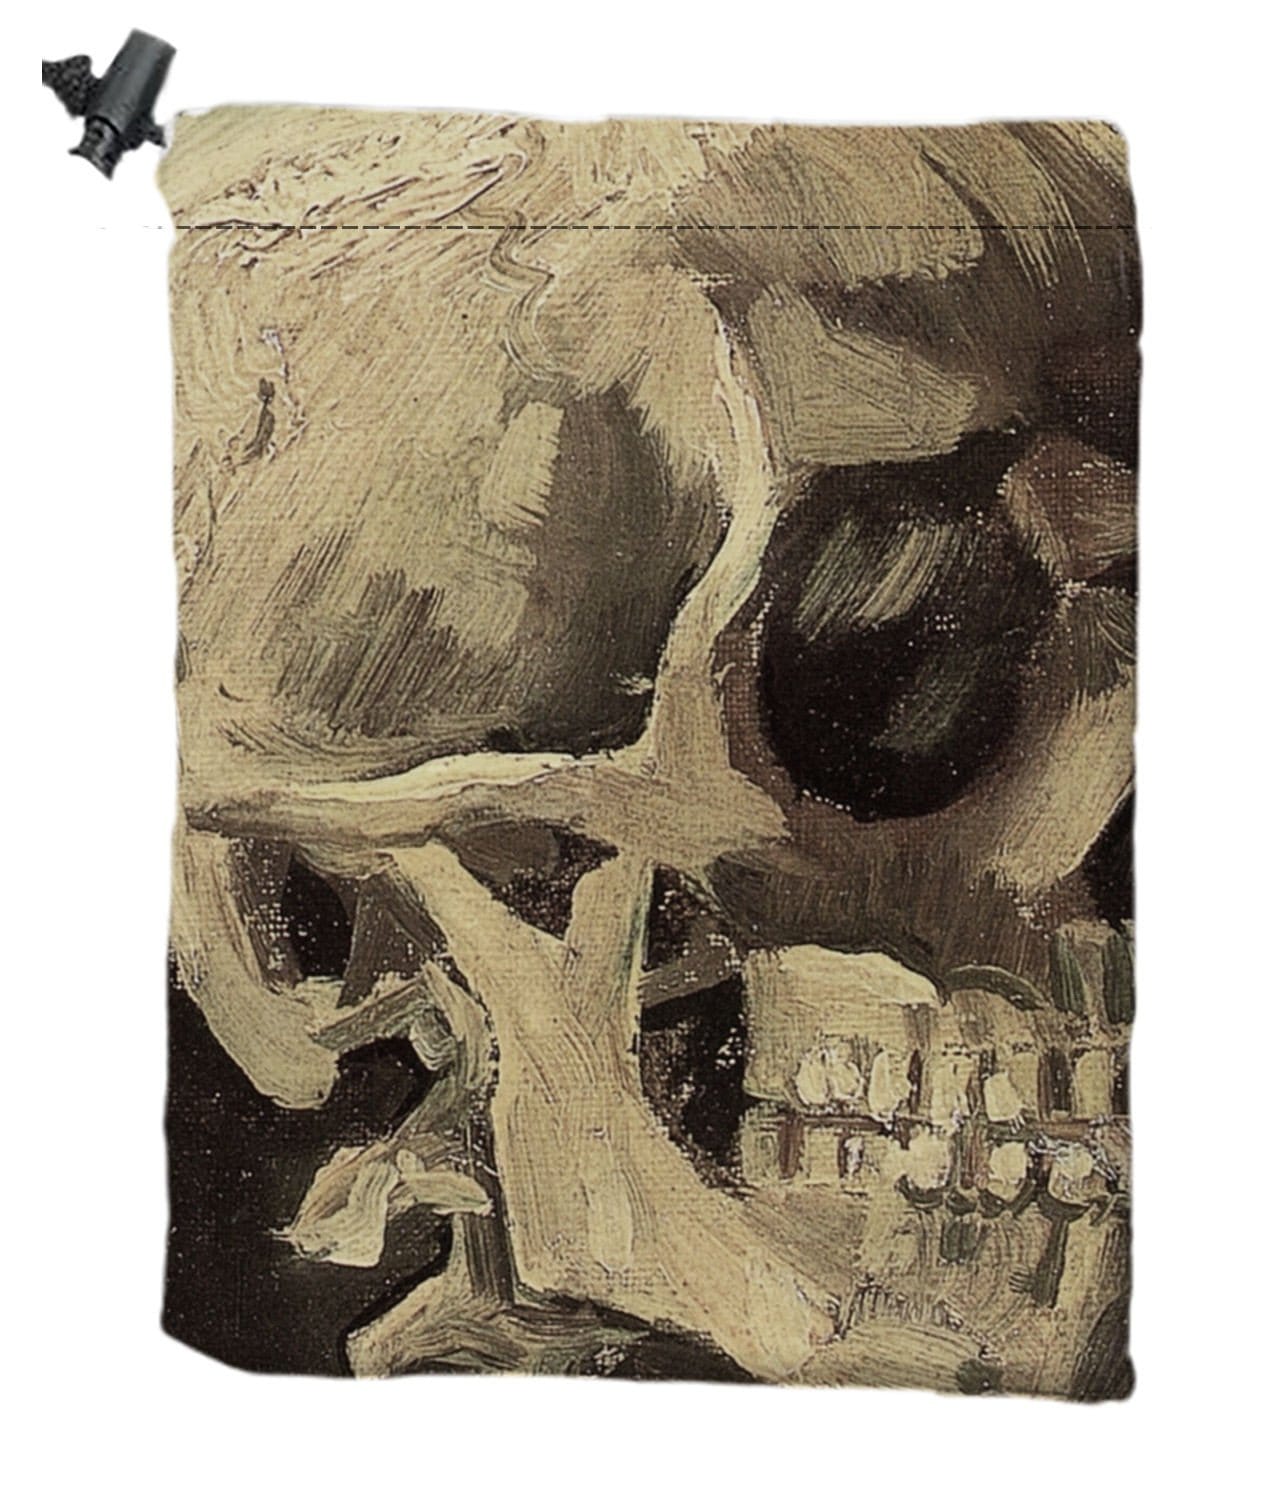 Zombie Dice Bag by Vincent van Gogh - Dice Bag - Original Magic Art - Accessories for Magic the Gathering and other card games